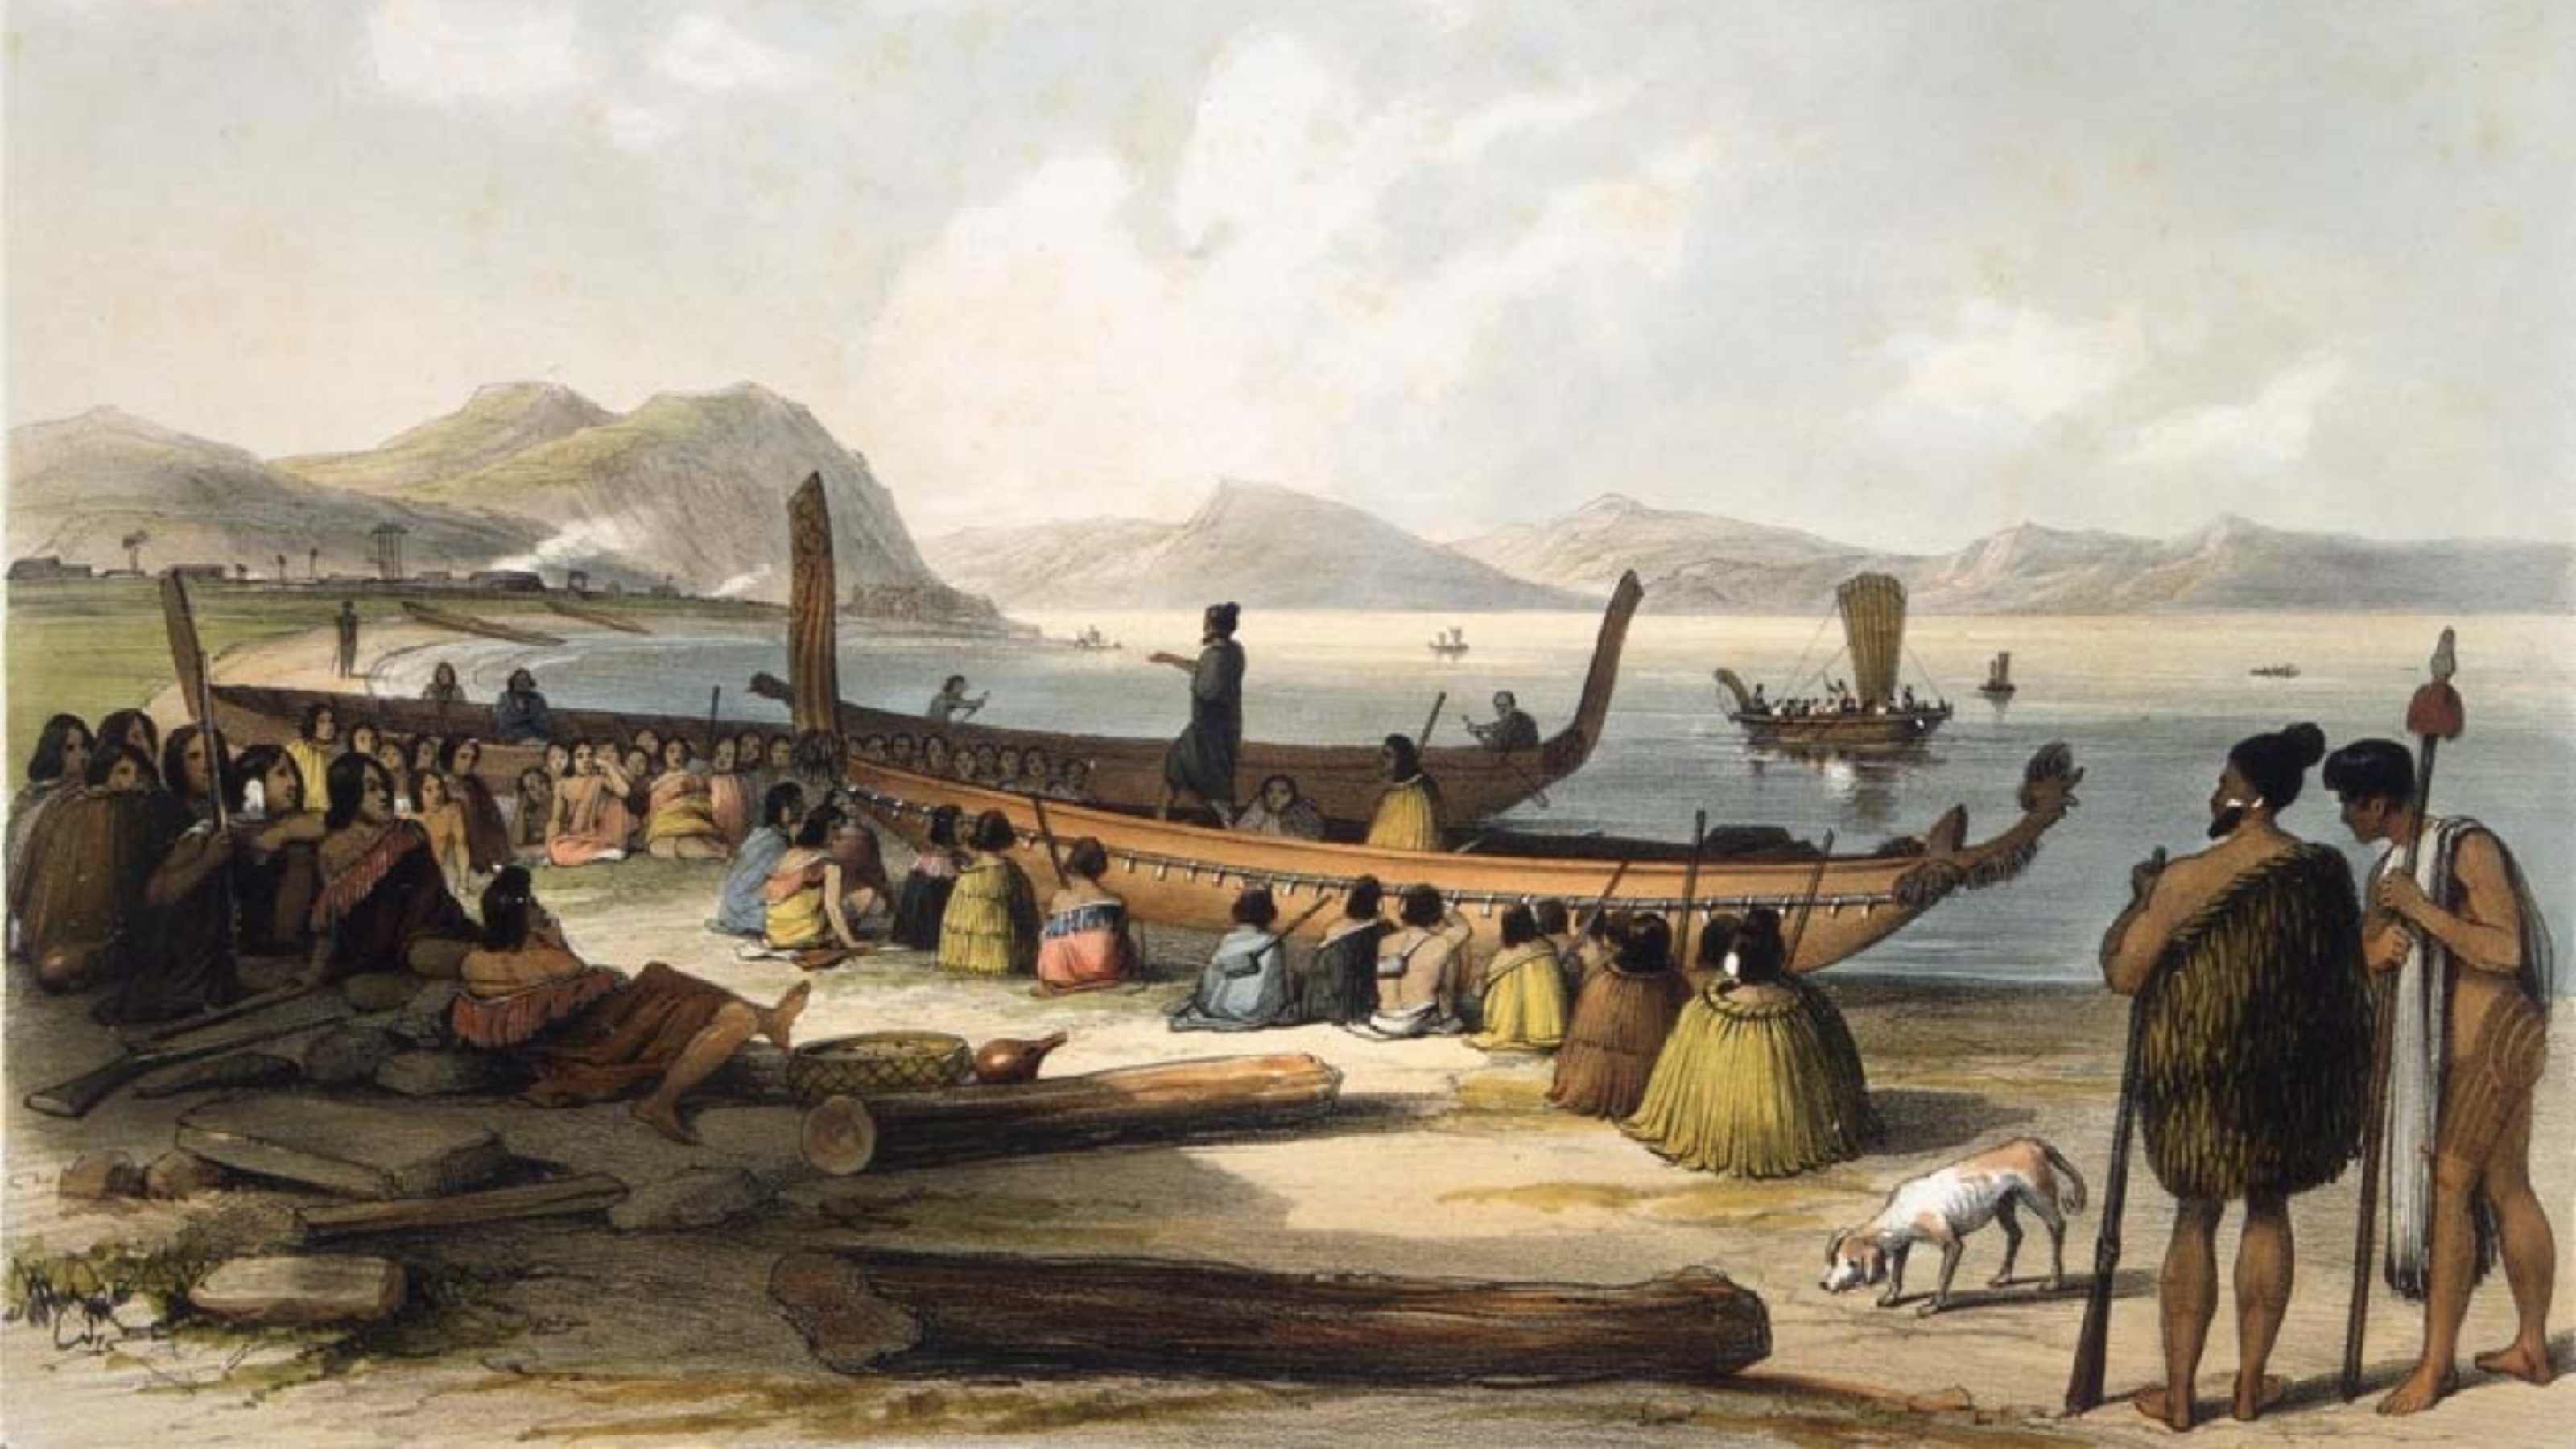 Painting of traditional Maori on a beach with waka (canoes)